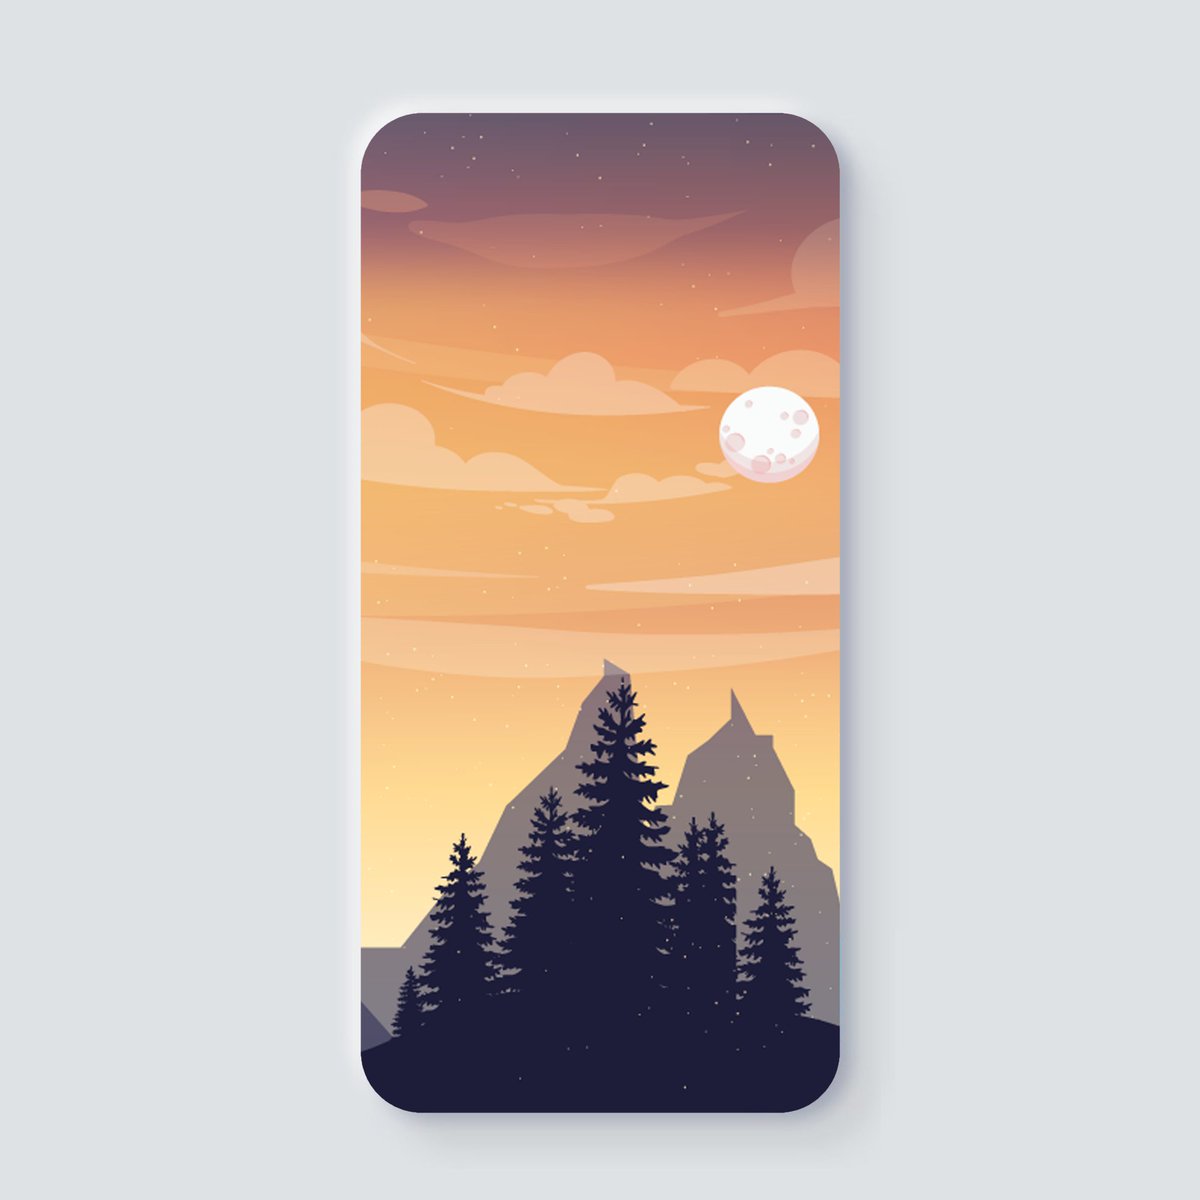 Sunset. ⠀

Wallpaper Link in Bio. 

#kwgt #Neumorphism #setup #Customized
#android #app #androidcommunity
#launcher #homescreen #homescreensetup #wallpapers
#wallpaper #hdwallpapers #hdwallpaper #widget
#playstore #googleplay #smartphone 
#androidapps